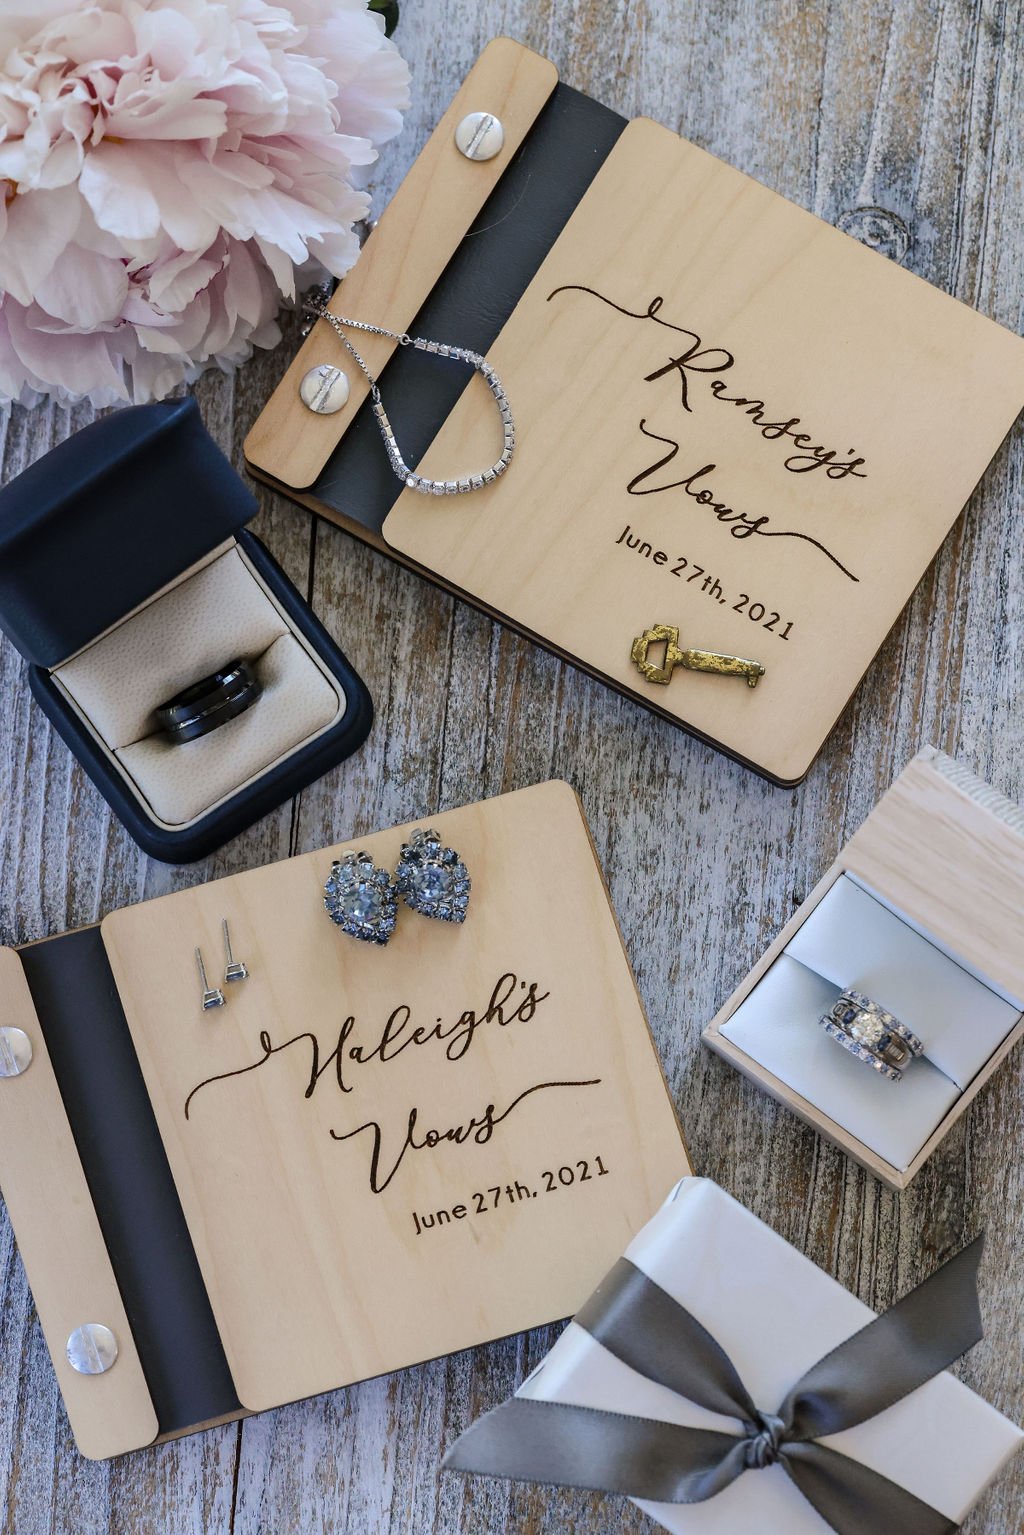 Gorgeous wedding details with rings and vow books.jpg